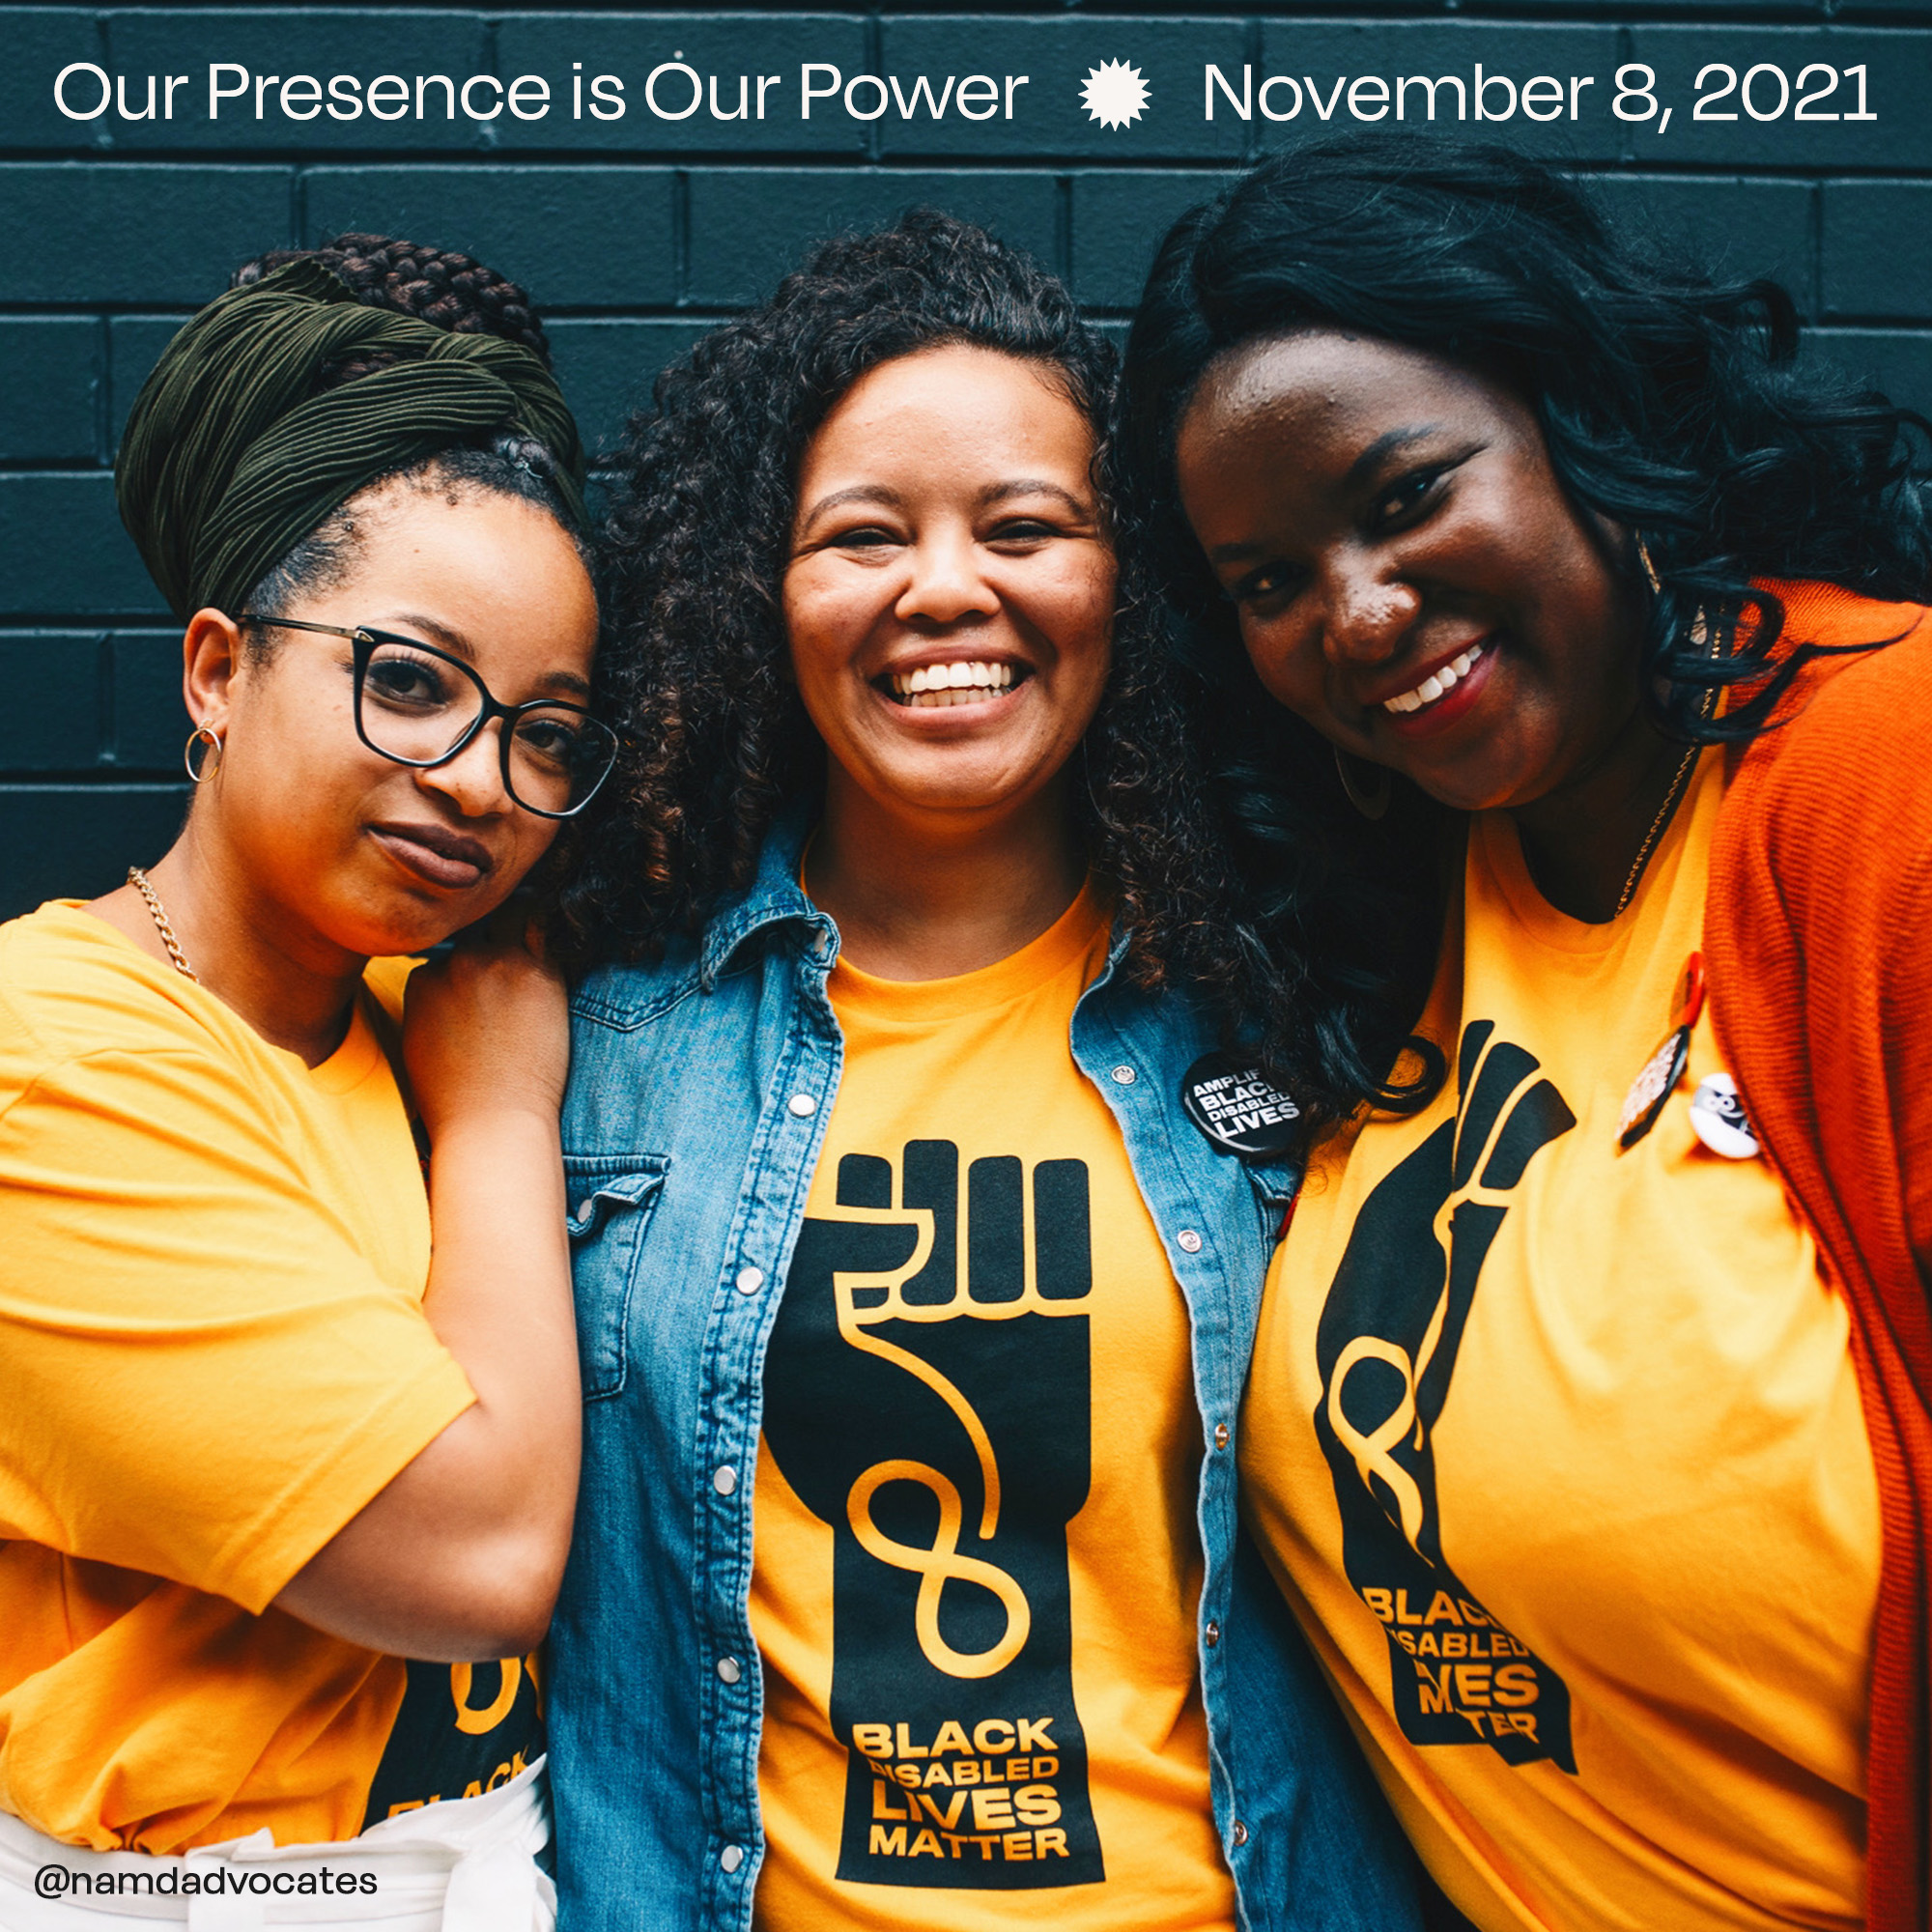 Three Black women are standing in front of a black brick wall, they are each wearing a yellow t-shirt that says ‘Black Disabled Lives Matter’ inside of a Black fist. The top of the photo has white text that says Our Presence is Our Power * November 8, 2021. @namdadvocates